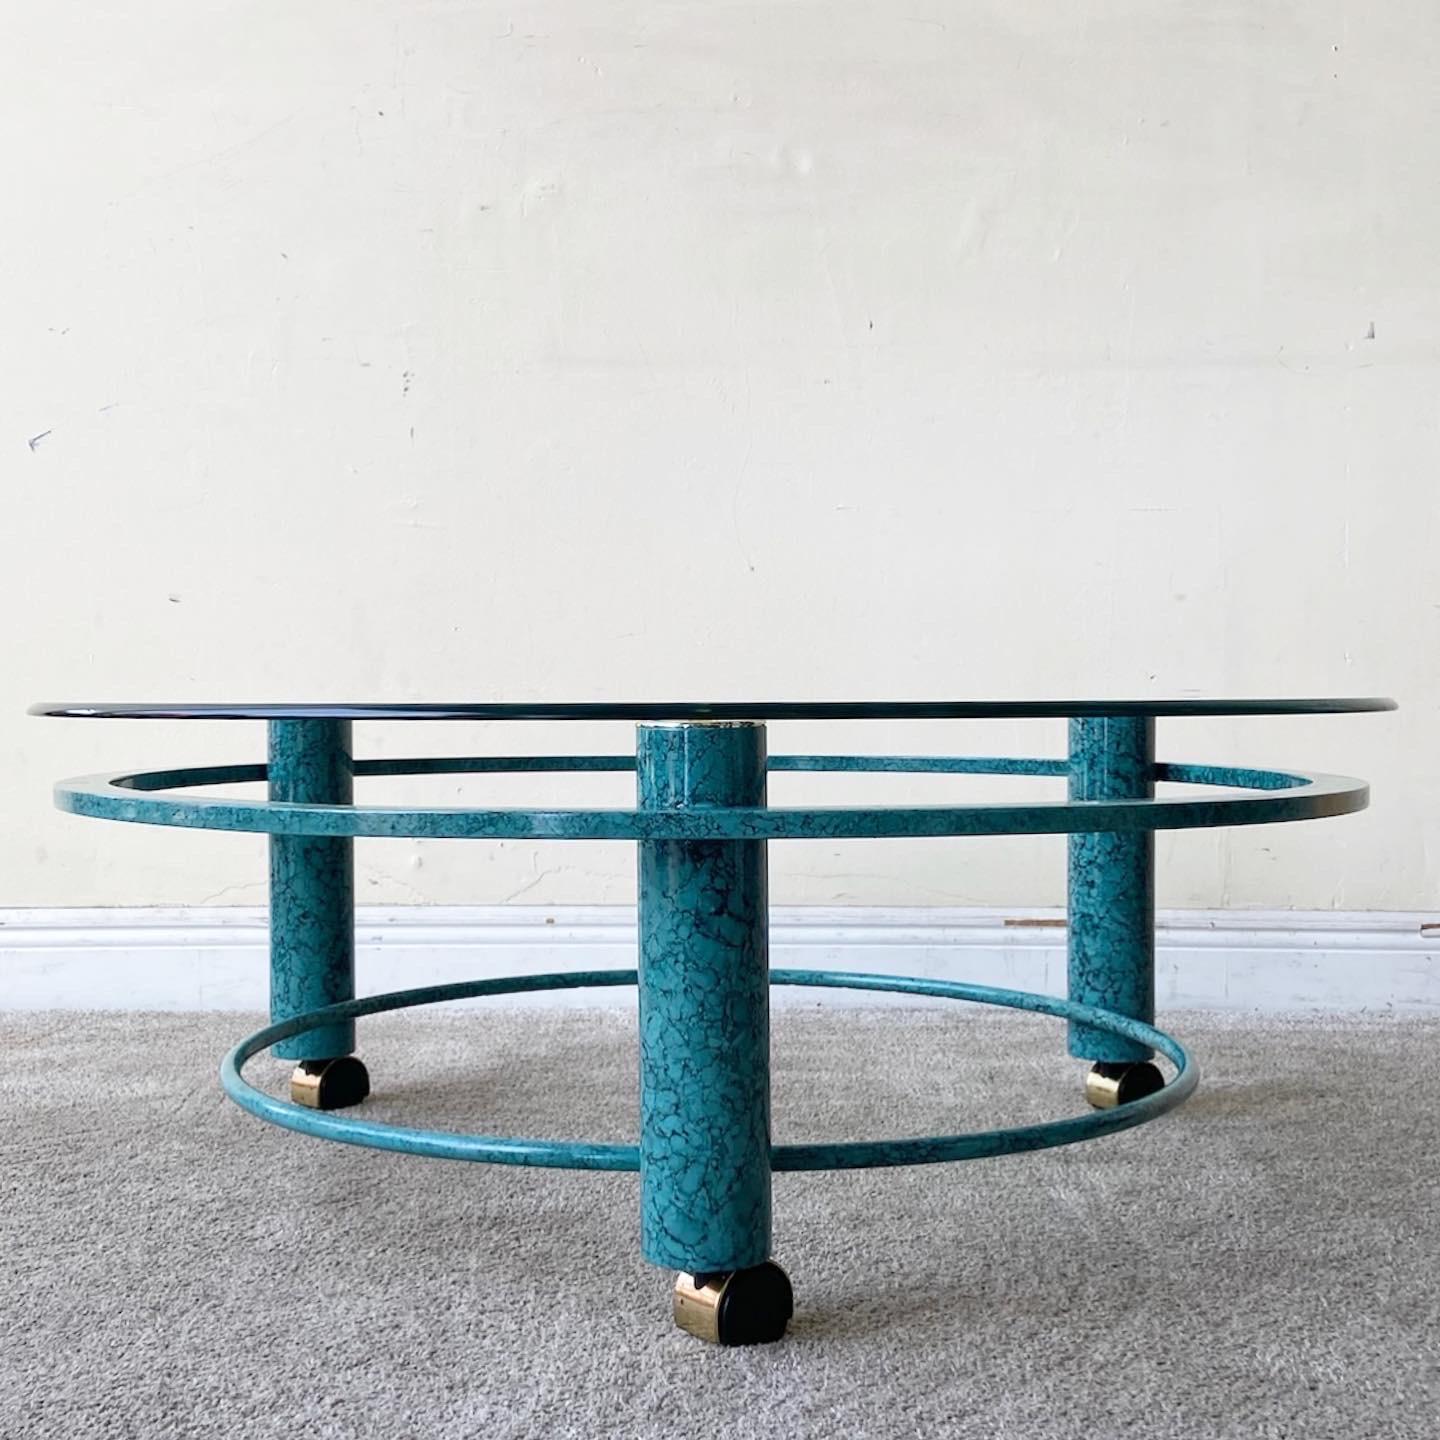 Amazing Postmodern teal blue circular coffee table. Features a circular Beveled glass top and sits on casters.
 